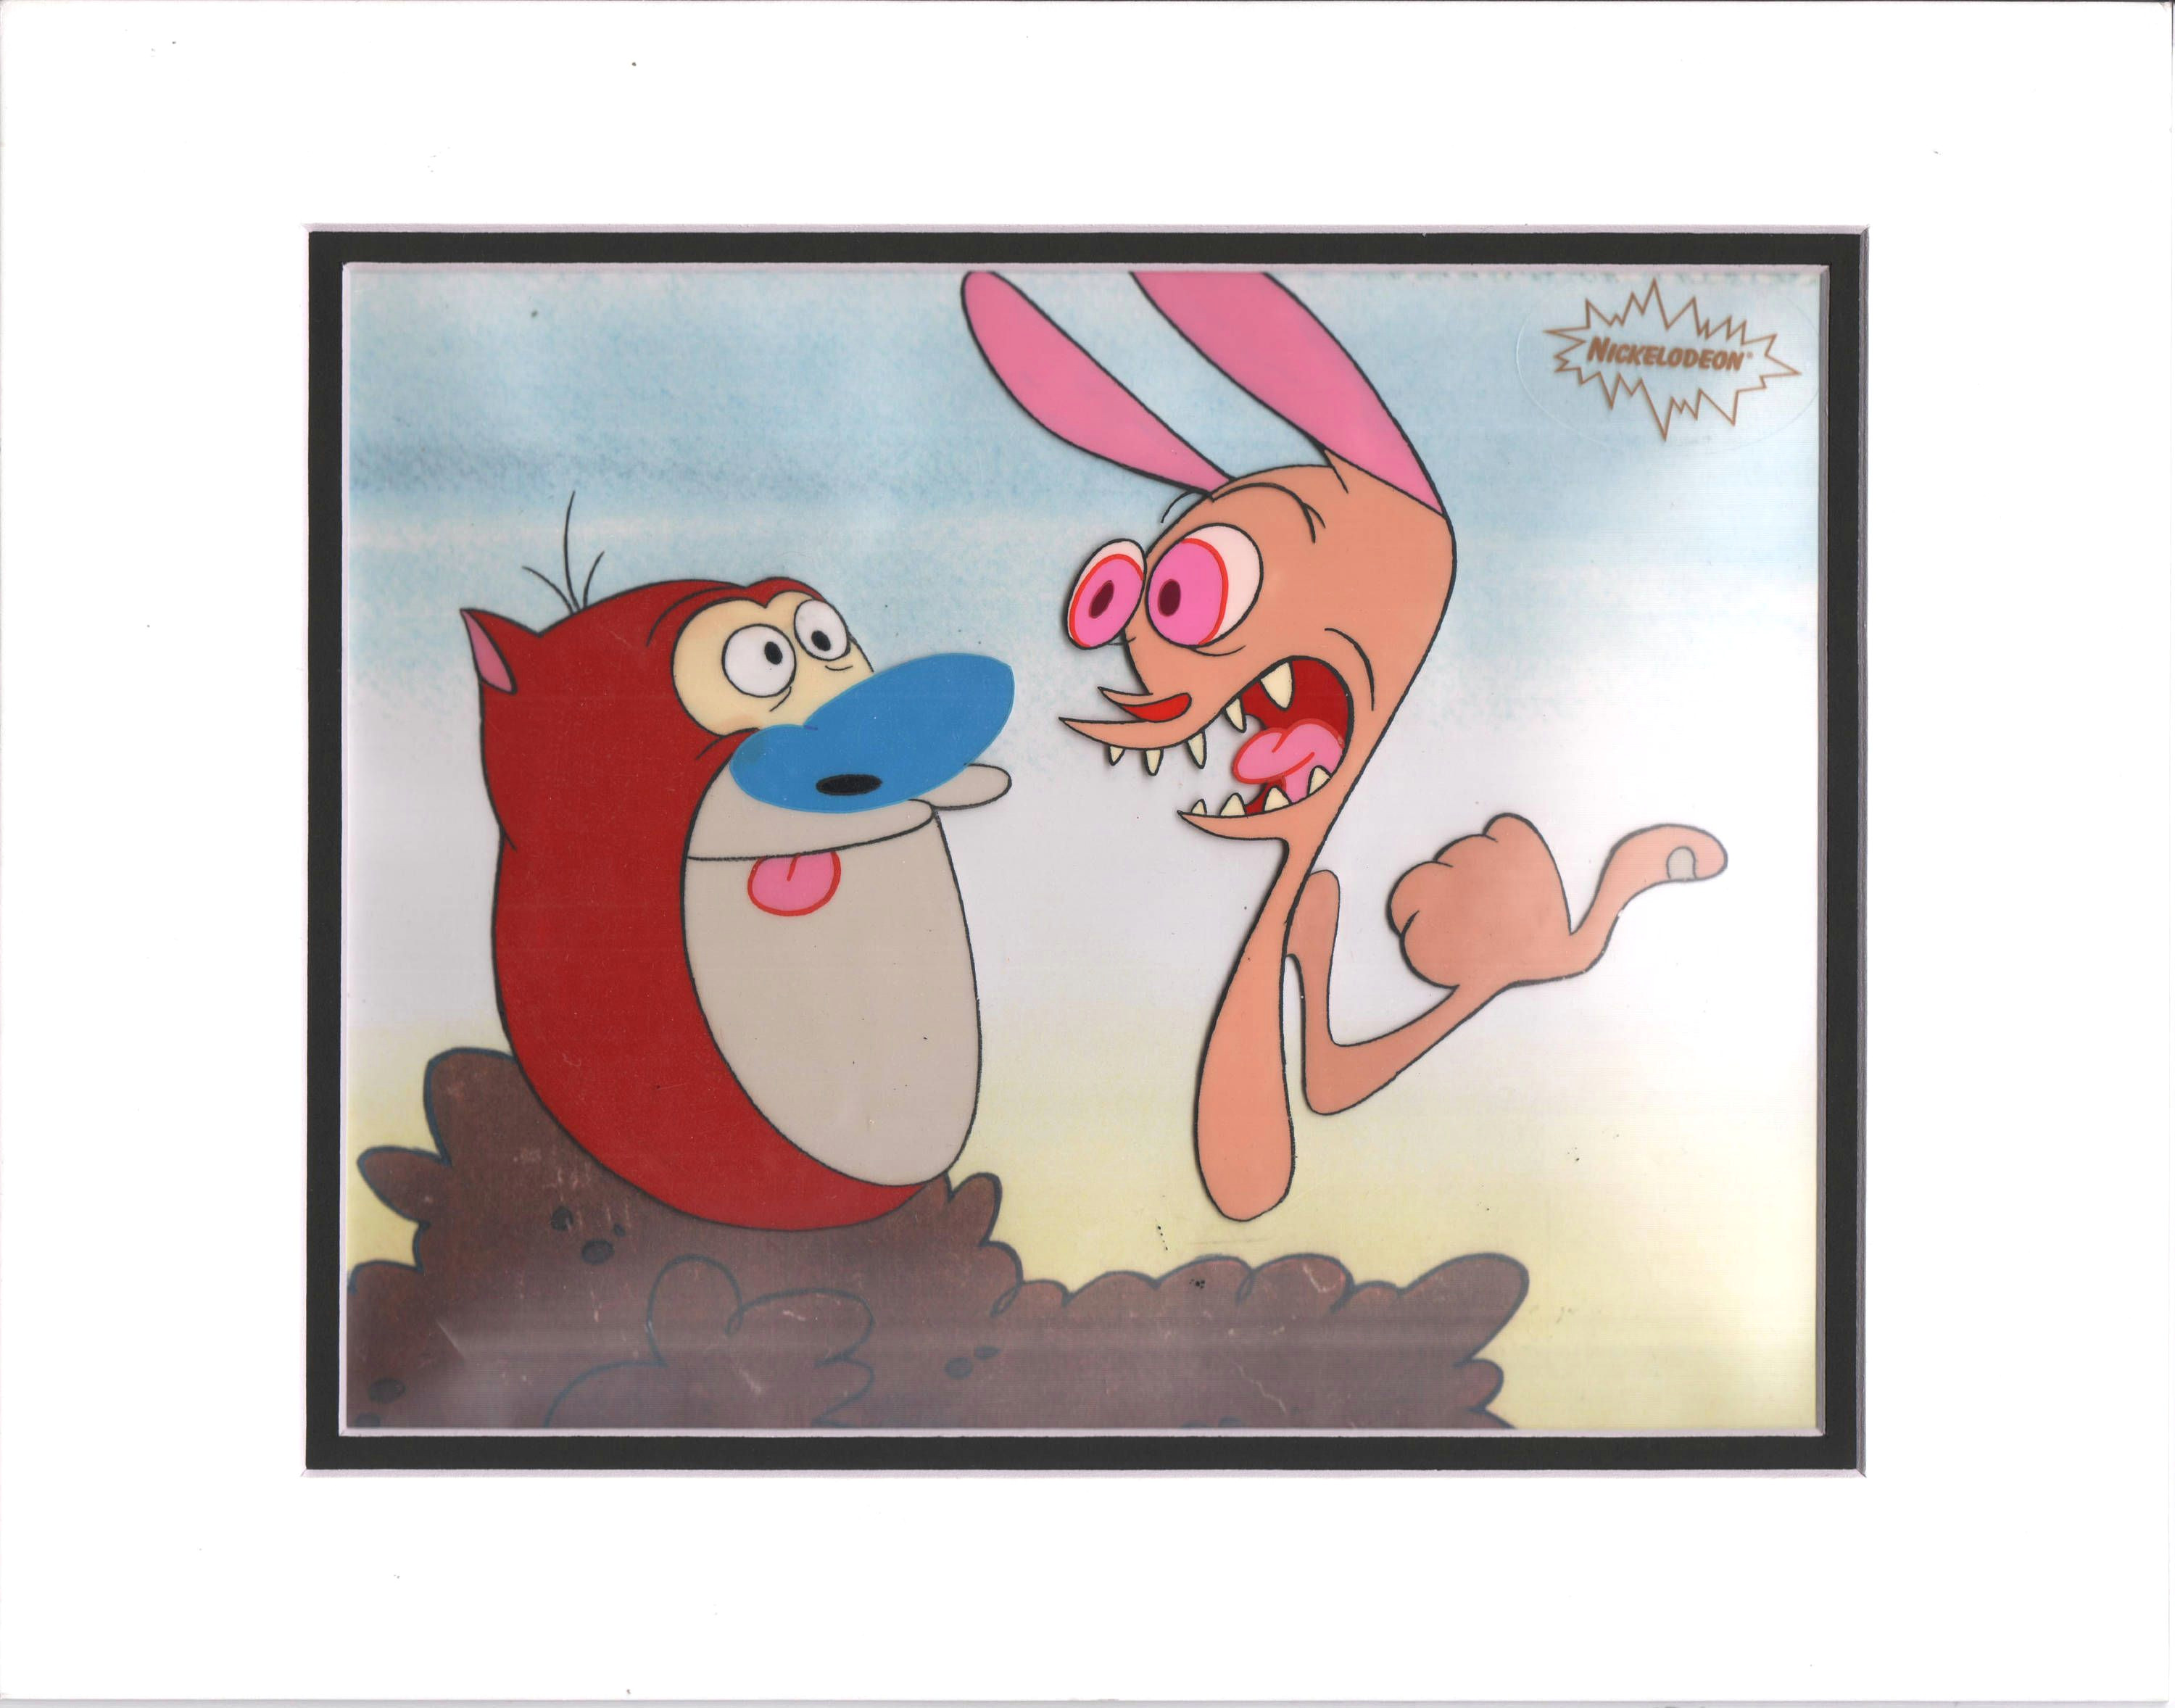 ren and stimpy show original production cel with print background nickelodeon seal and coa sc by charlesscottgallery on etsy